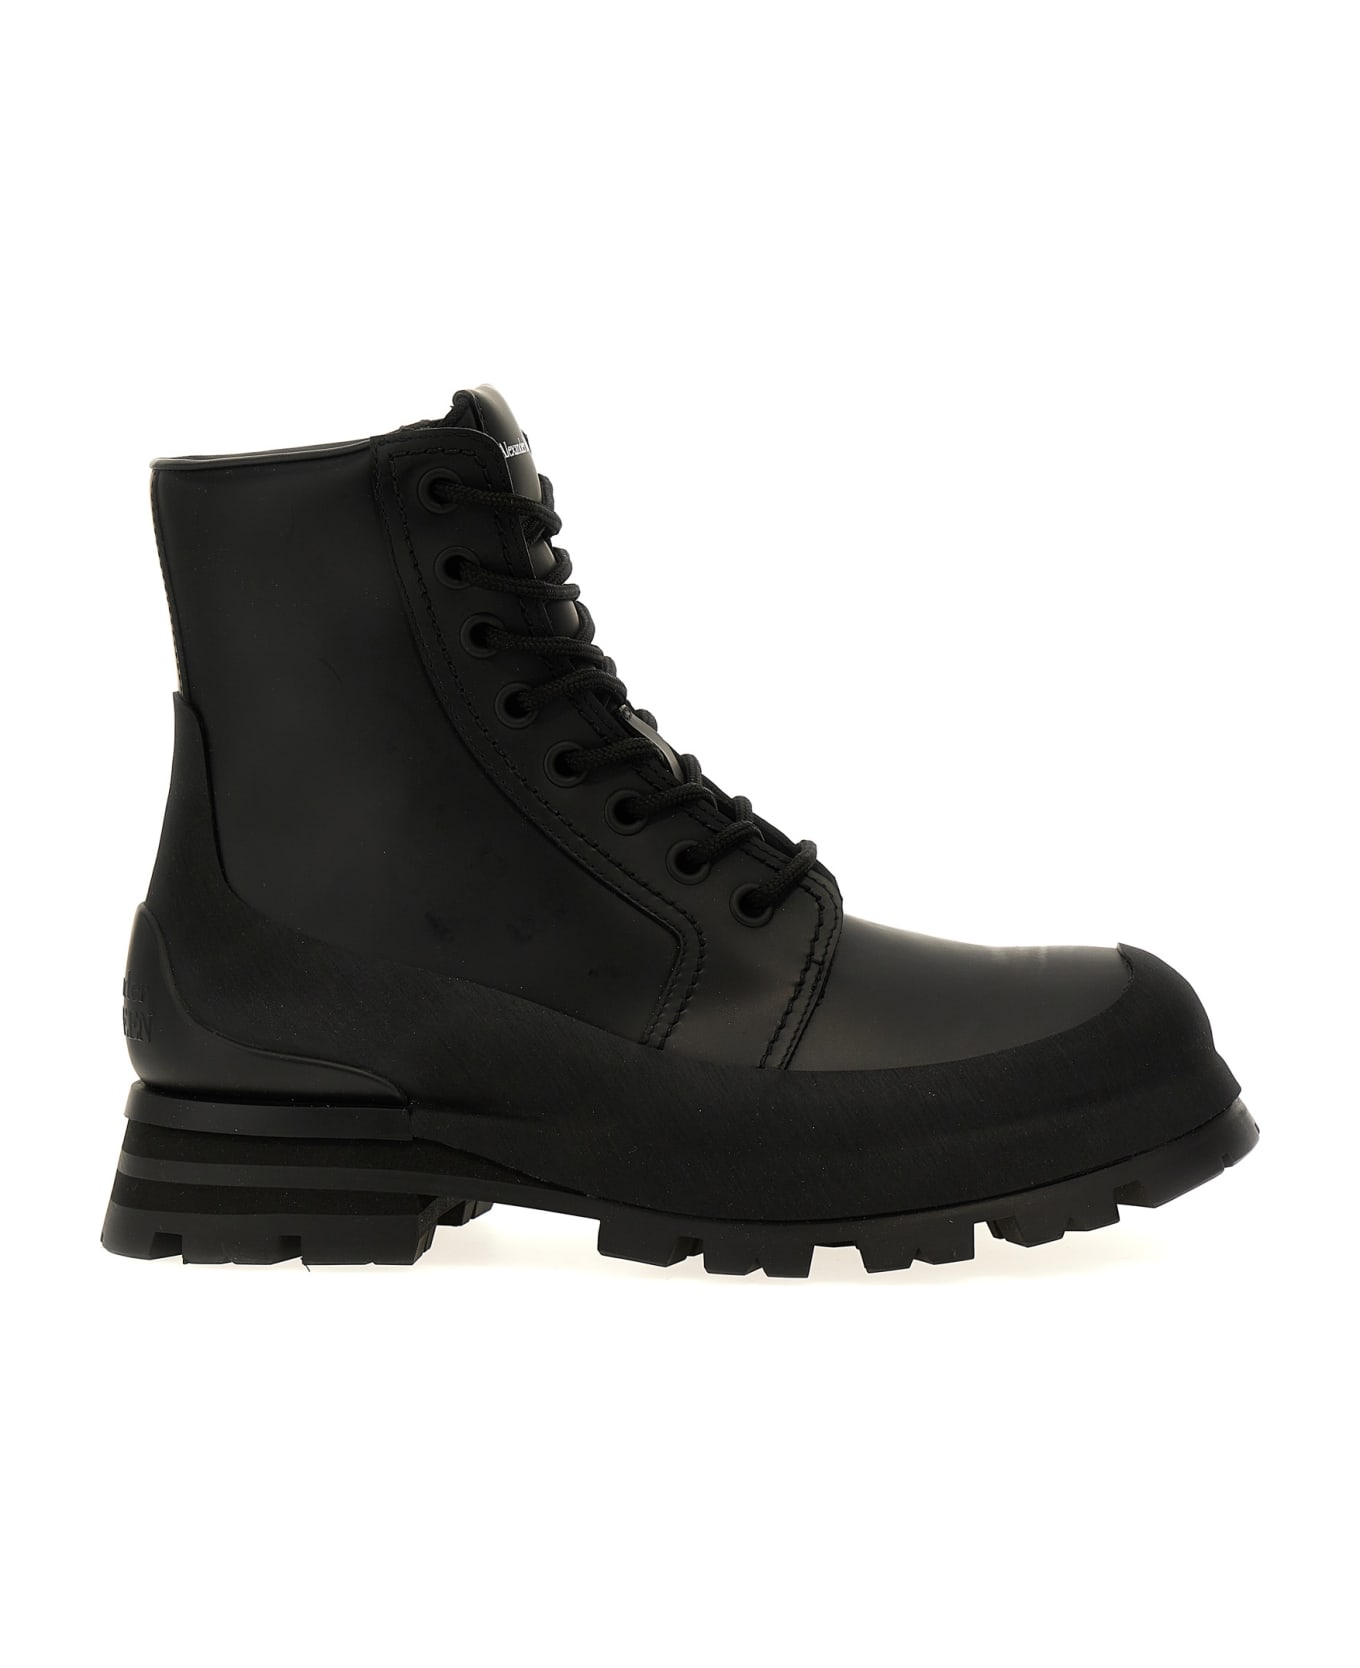 Alexander McQueen Wander Leather Lace-up Boots - Black